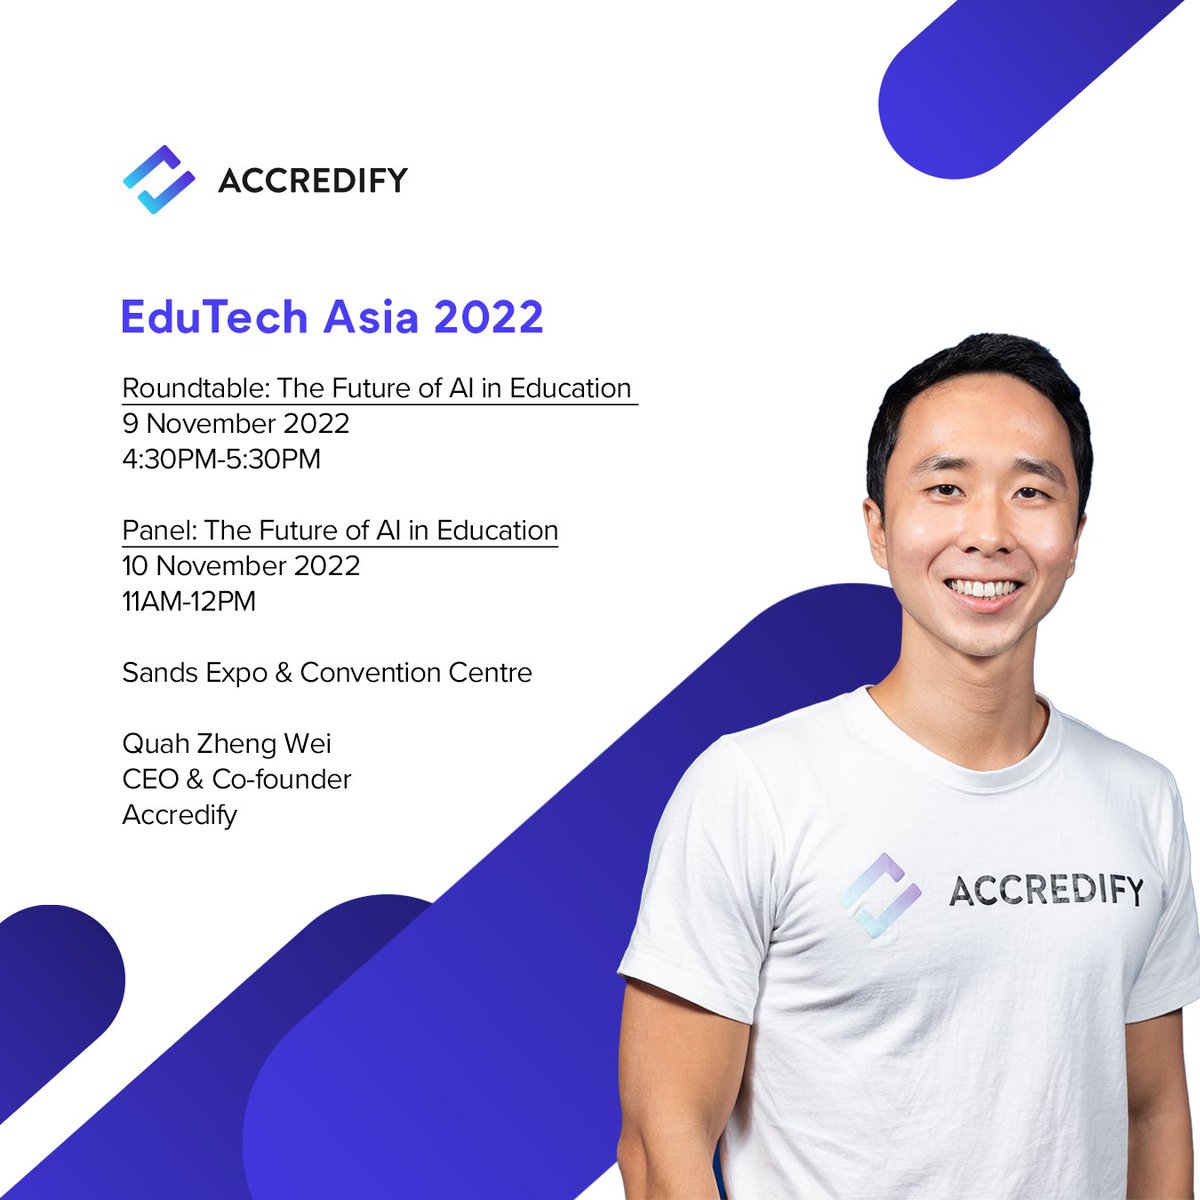 @Accredify_io's CEO, Zheng Wei, has been invited to speak about the future of #AI in #education at @AWS's Roundtable and Panel at @edutech_asia! Thank you AWS for the opportunity!

Register here: secure.terrapinn.com/V5/step1.aspx?…

#verifiabledata